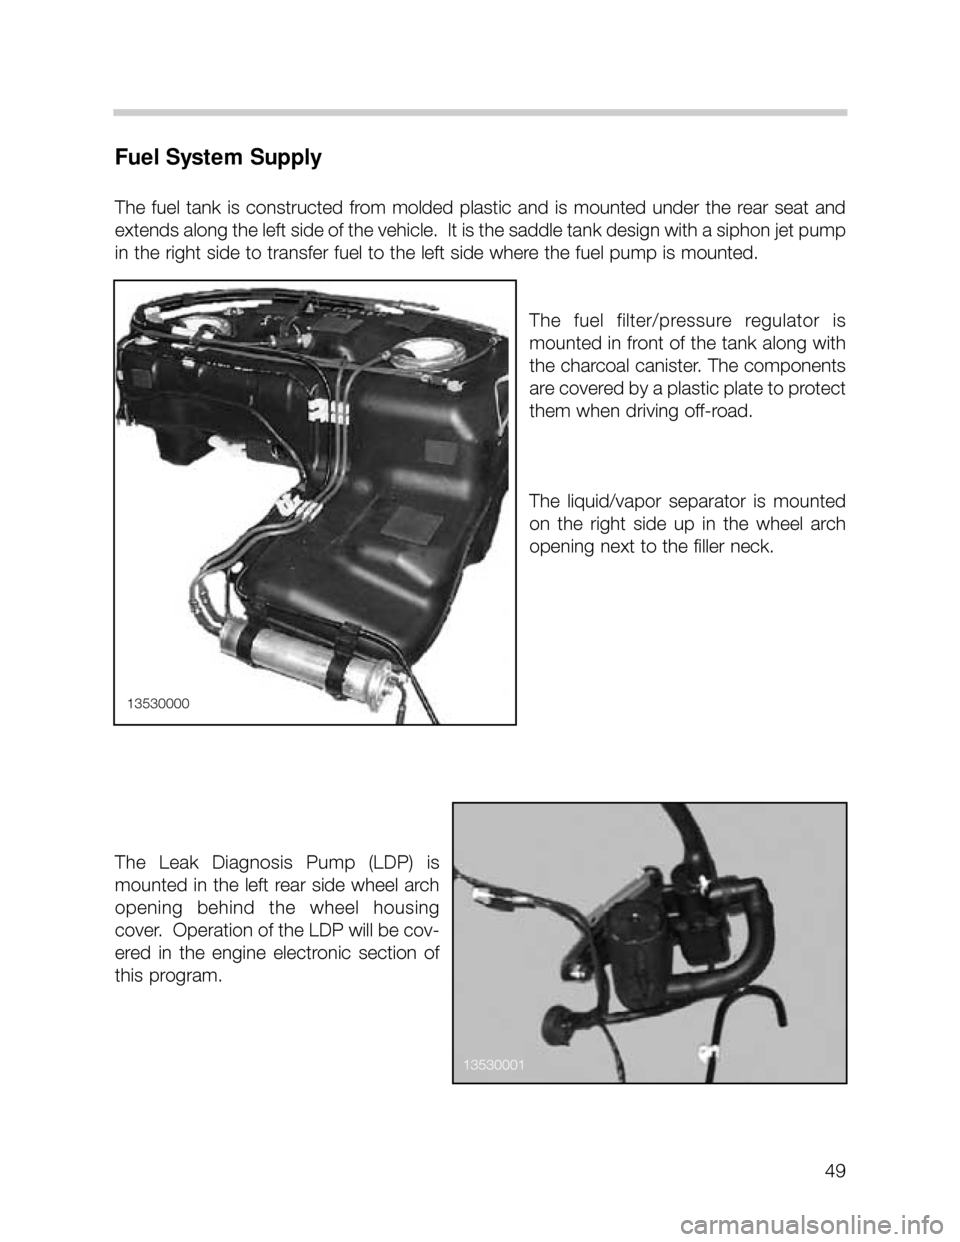 BMW X5 2000 E53 Service Manual 49
Fuel System Supply
The  fuel  tank  is  constructed  from  molded  plastic  and  is  mounted  under  the  rear  seat  and
extends along the left side of the vehicle.  It is the saddle tank design w